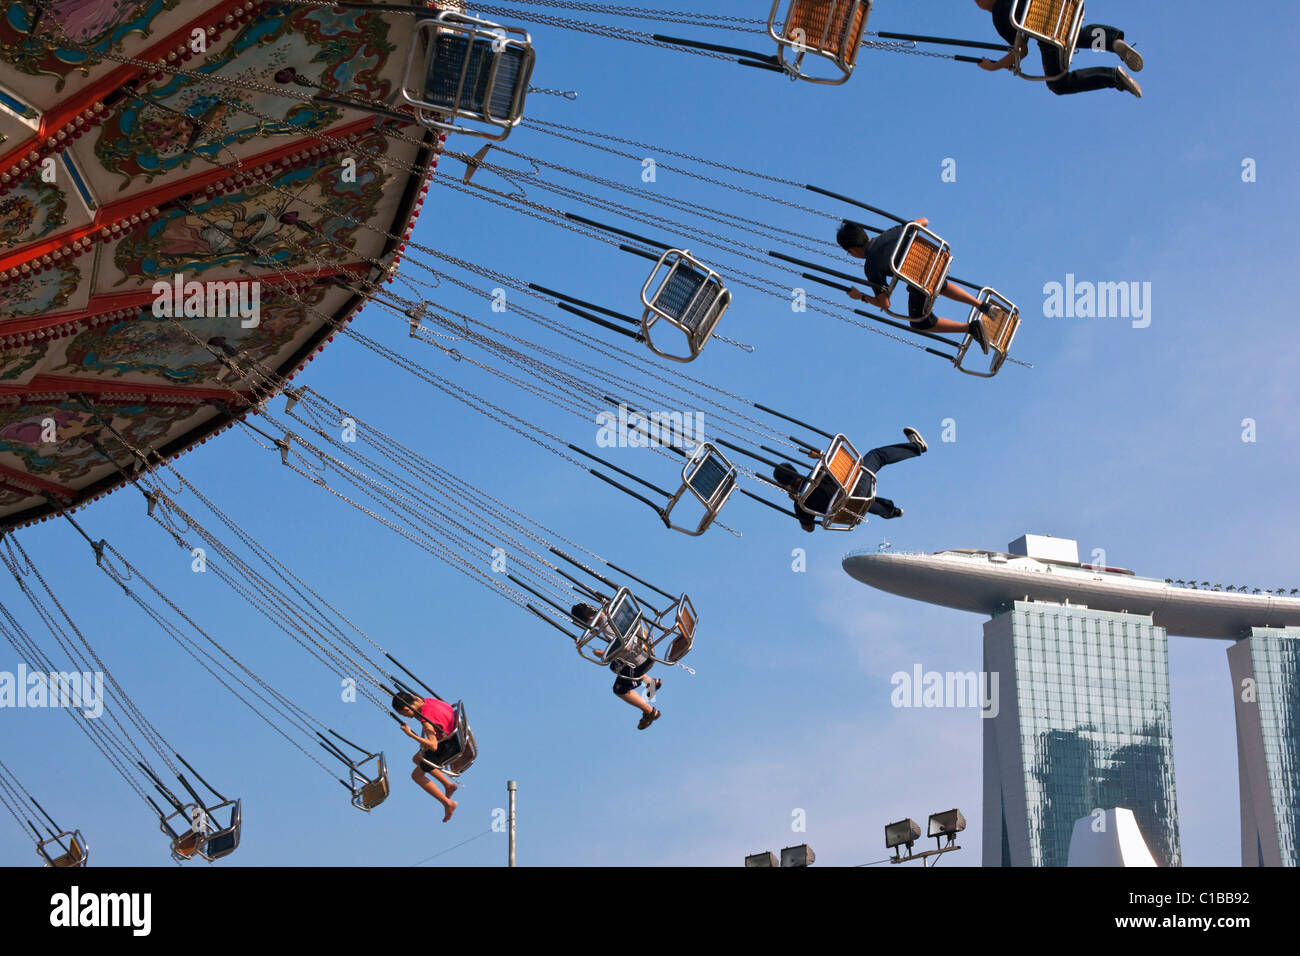 Amusement ride with Marina Bay Sands in the background.  Marina Bay, Singapore. Stock Photo